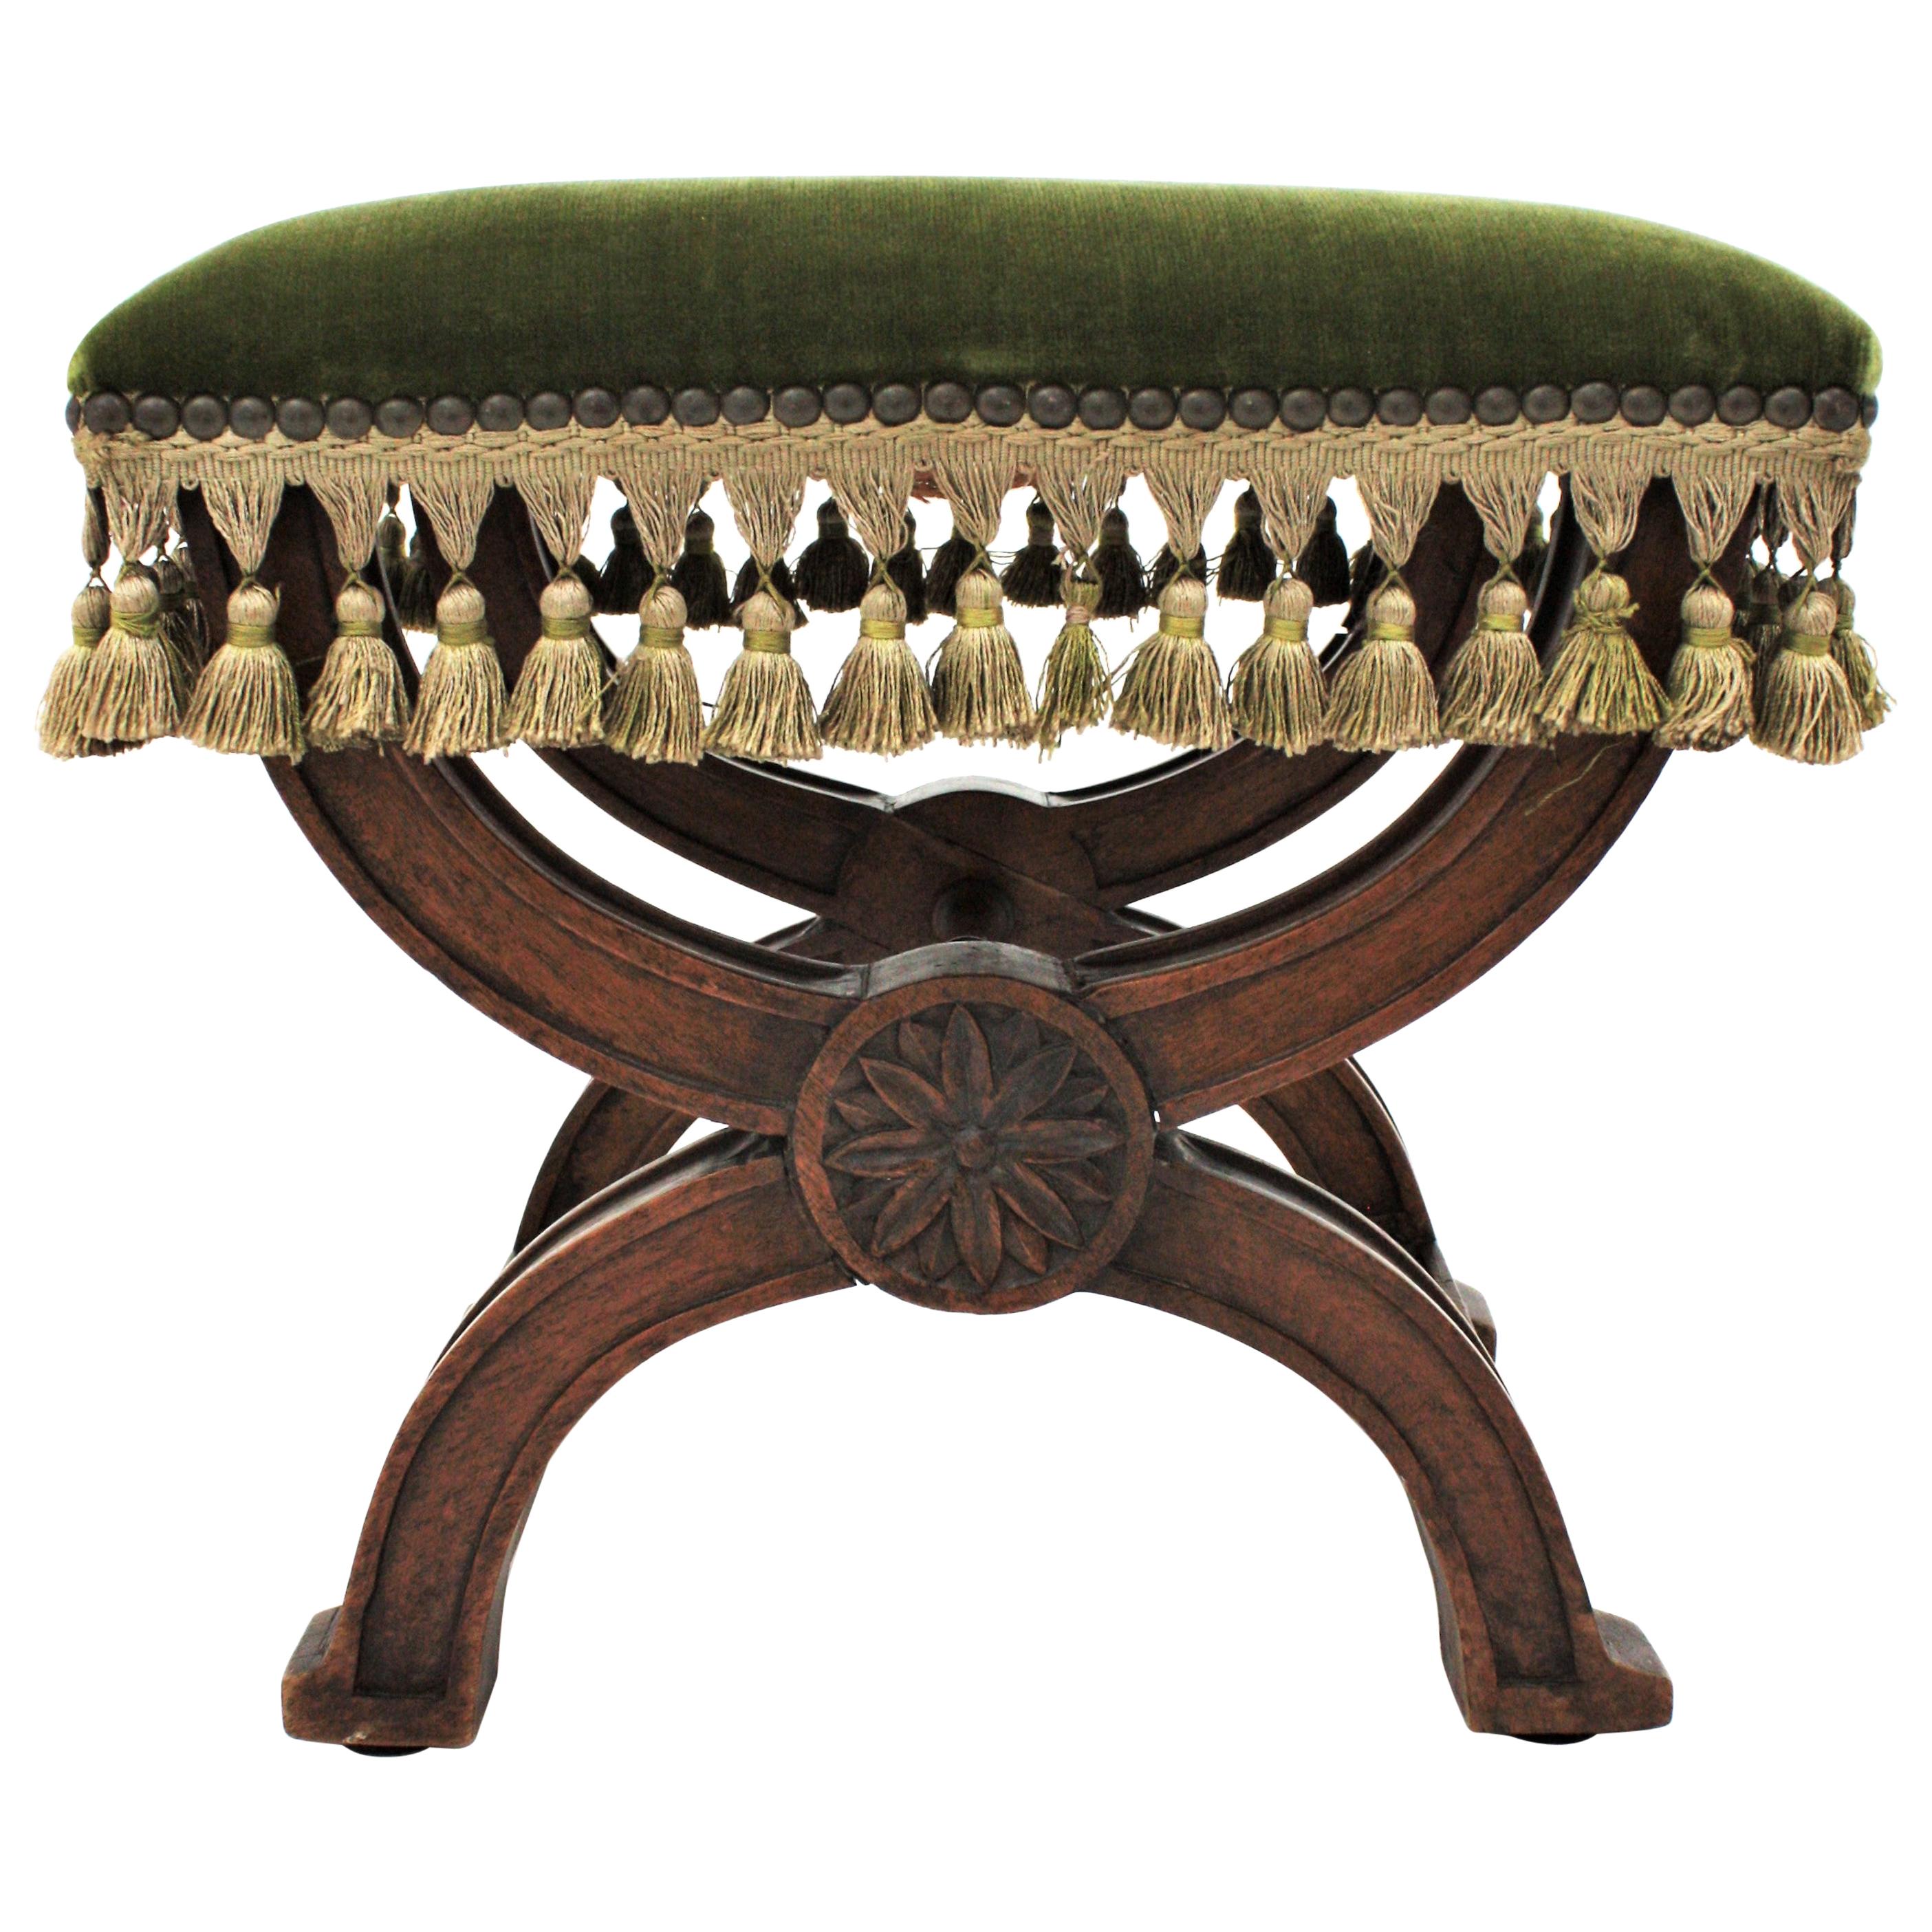 Spanish Renaissance Curule walnut stool in green velvet upholstery, Spain, 1880s.
Elegant Curule X-shape carved walnut footstool /ottoman with green velvet upholstered fringed seat.
This finely carved small stool has decorative floral ornaments on